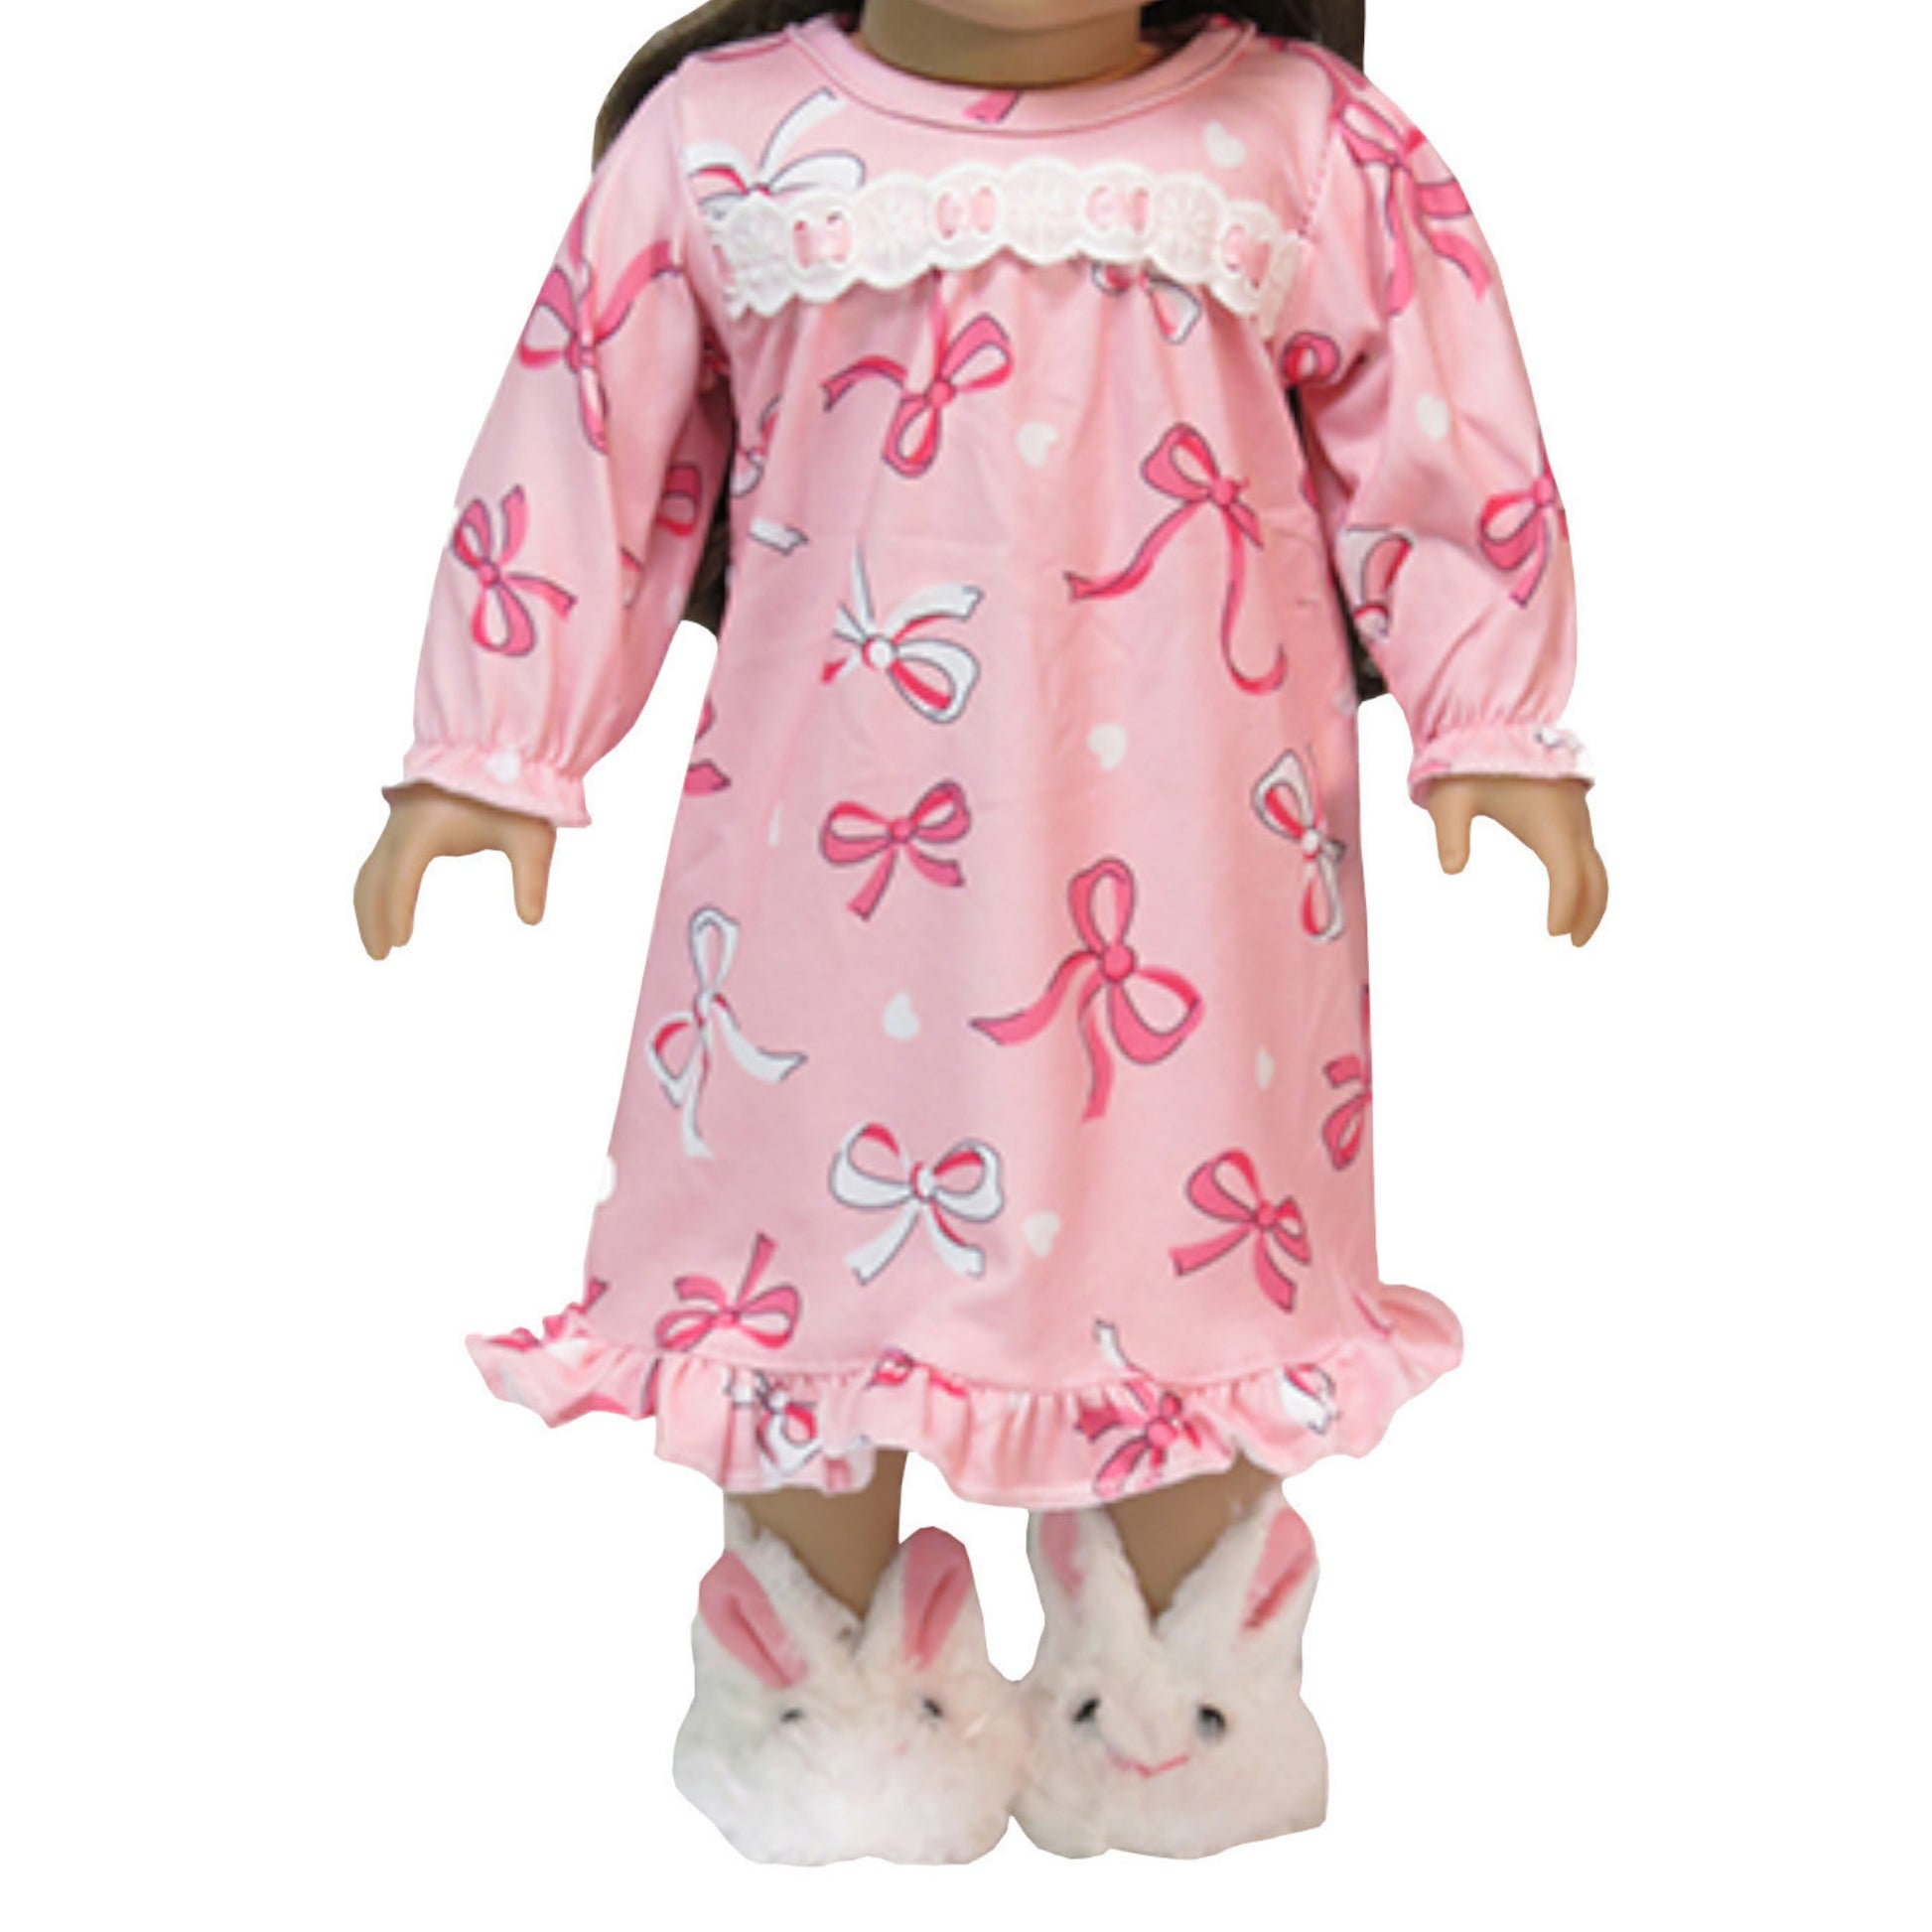 Pink Ribbon Nightgown for 18-inch dolls with doll